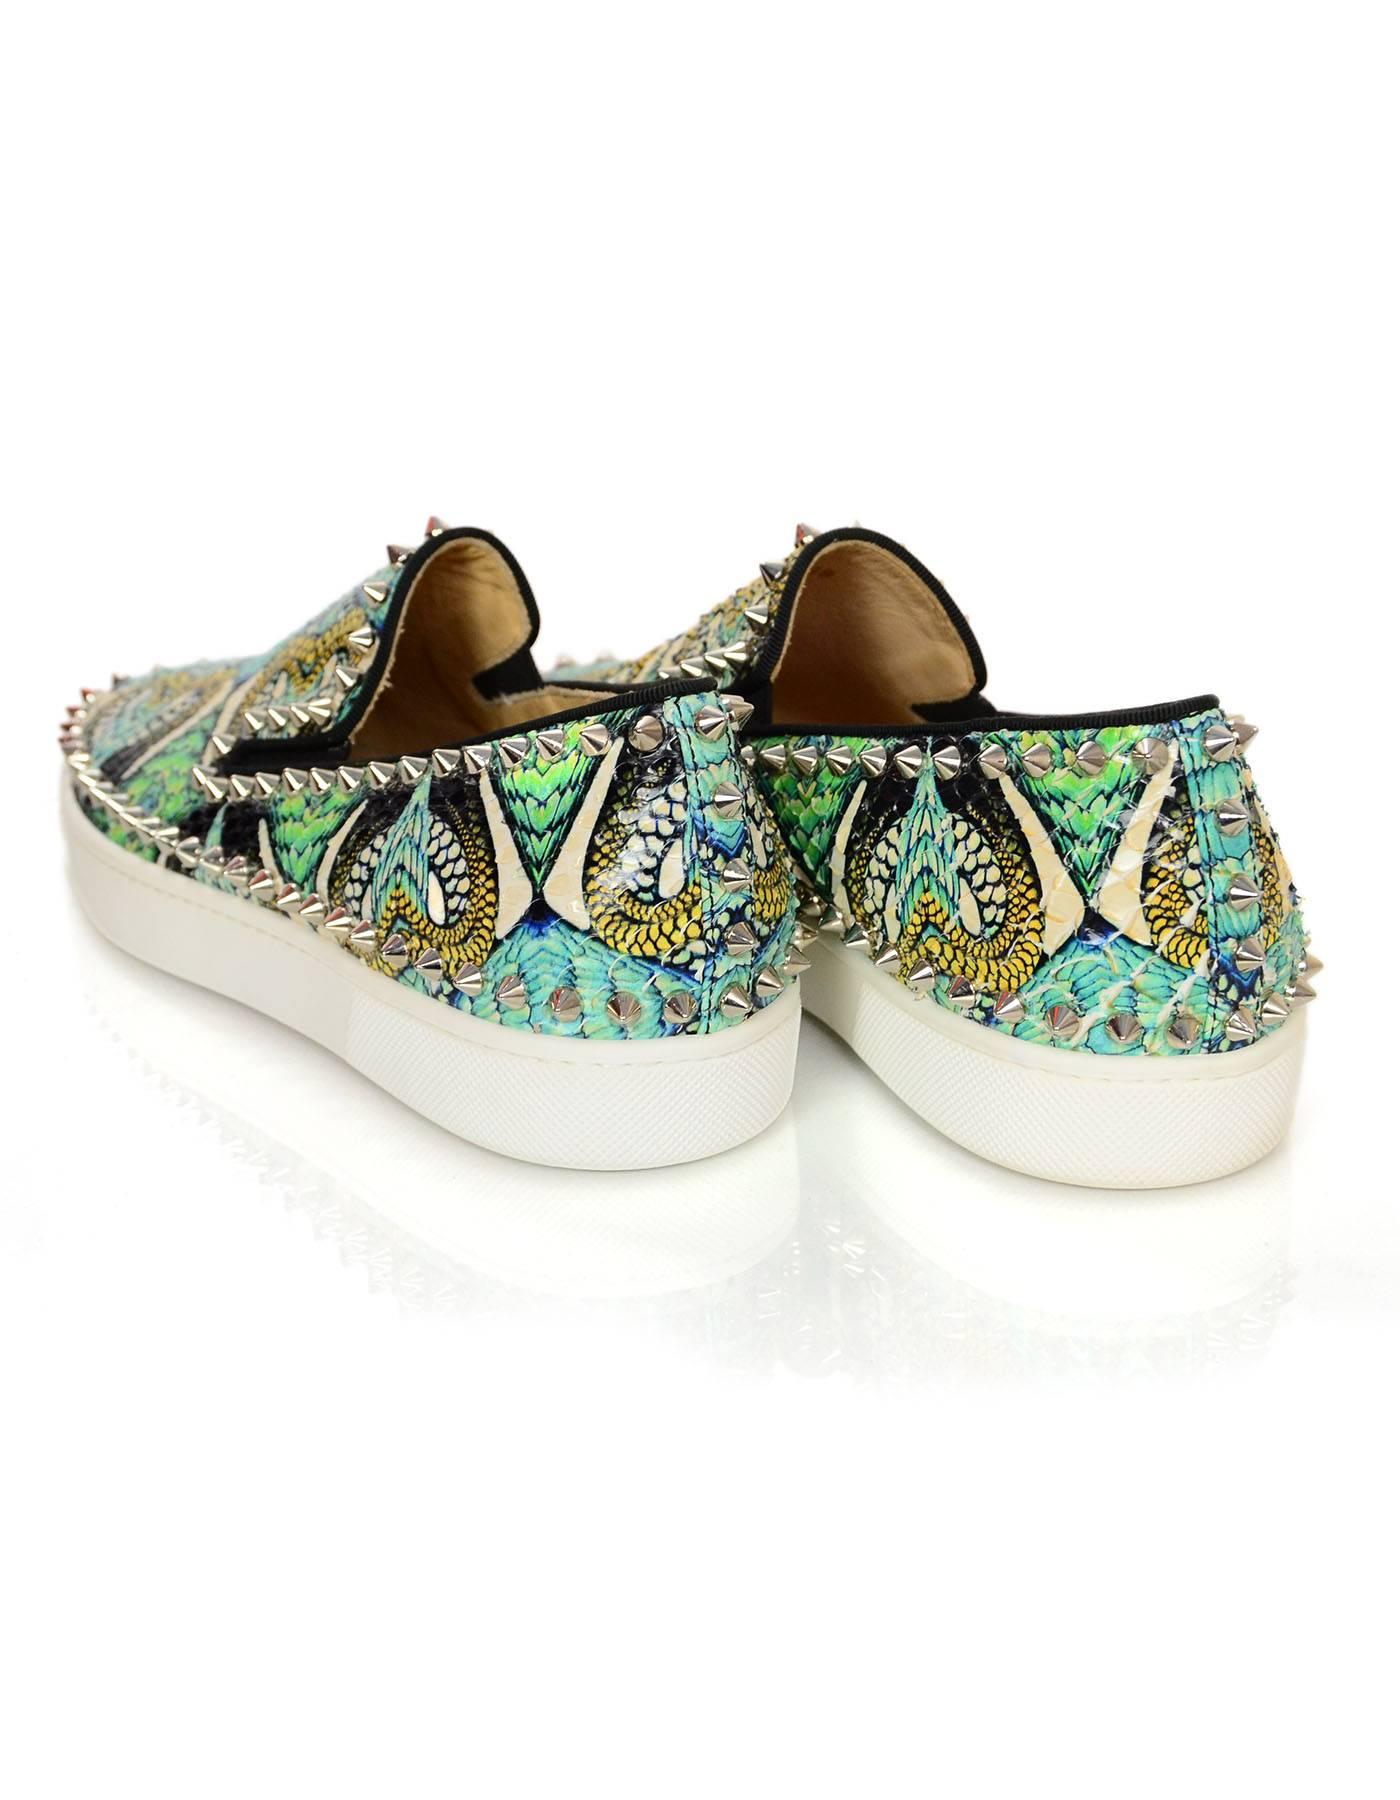 Women's Christian Louboutin Blue and Green Printed Python Stud Sneakers Sz 38